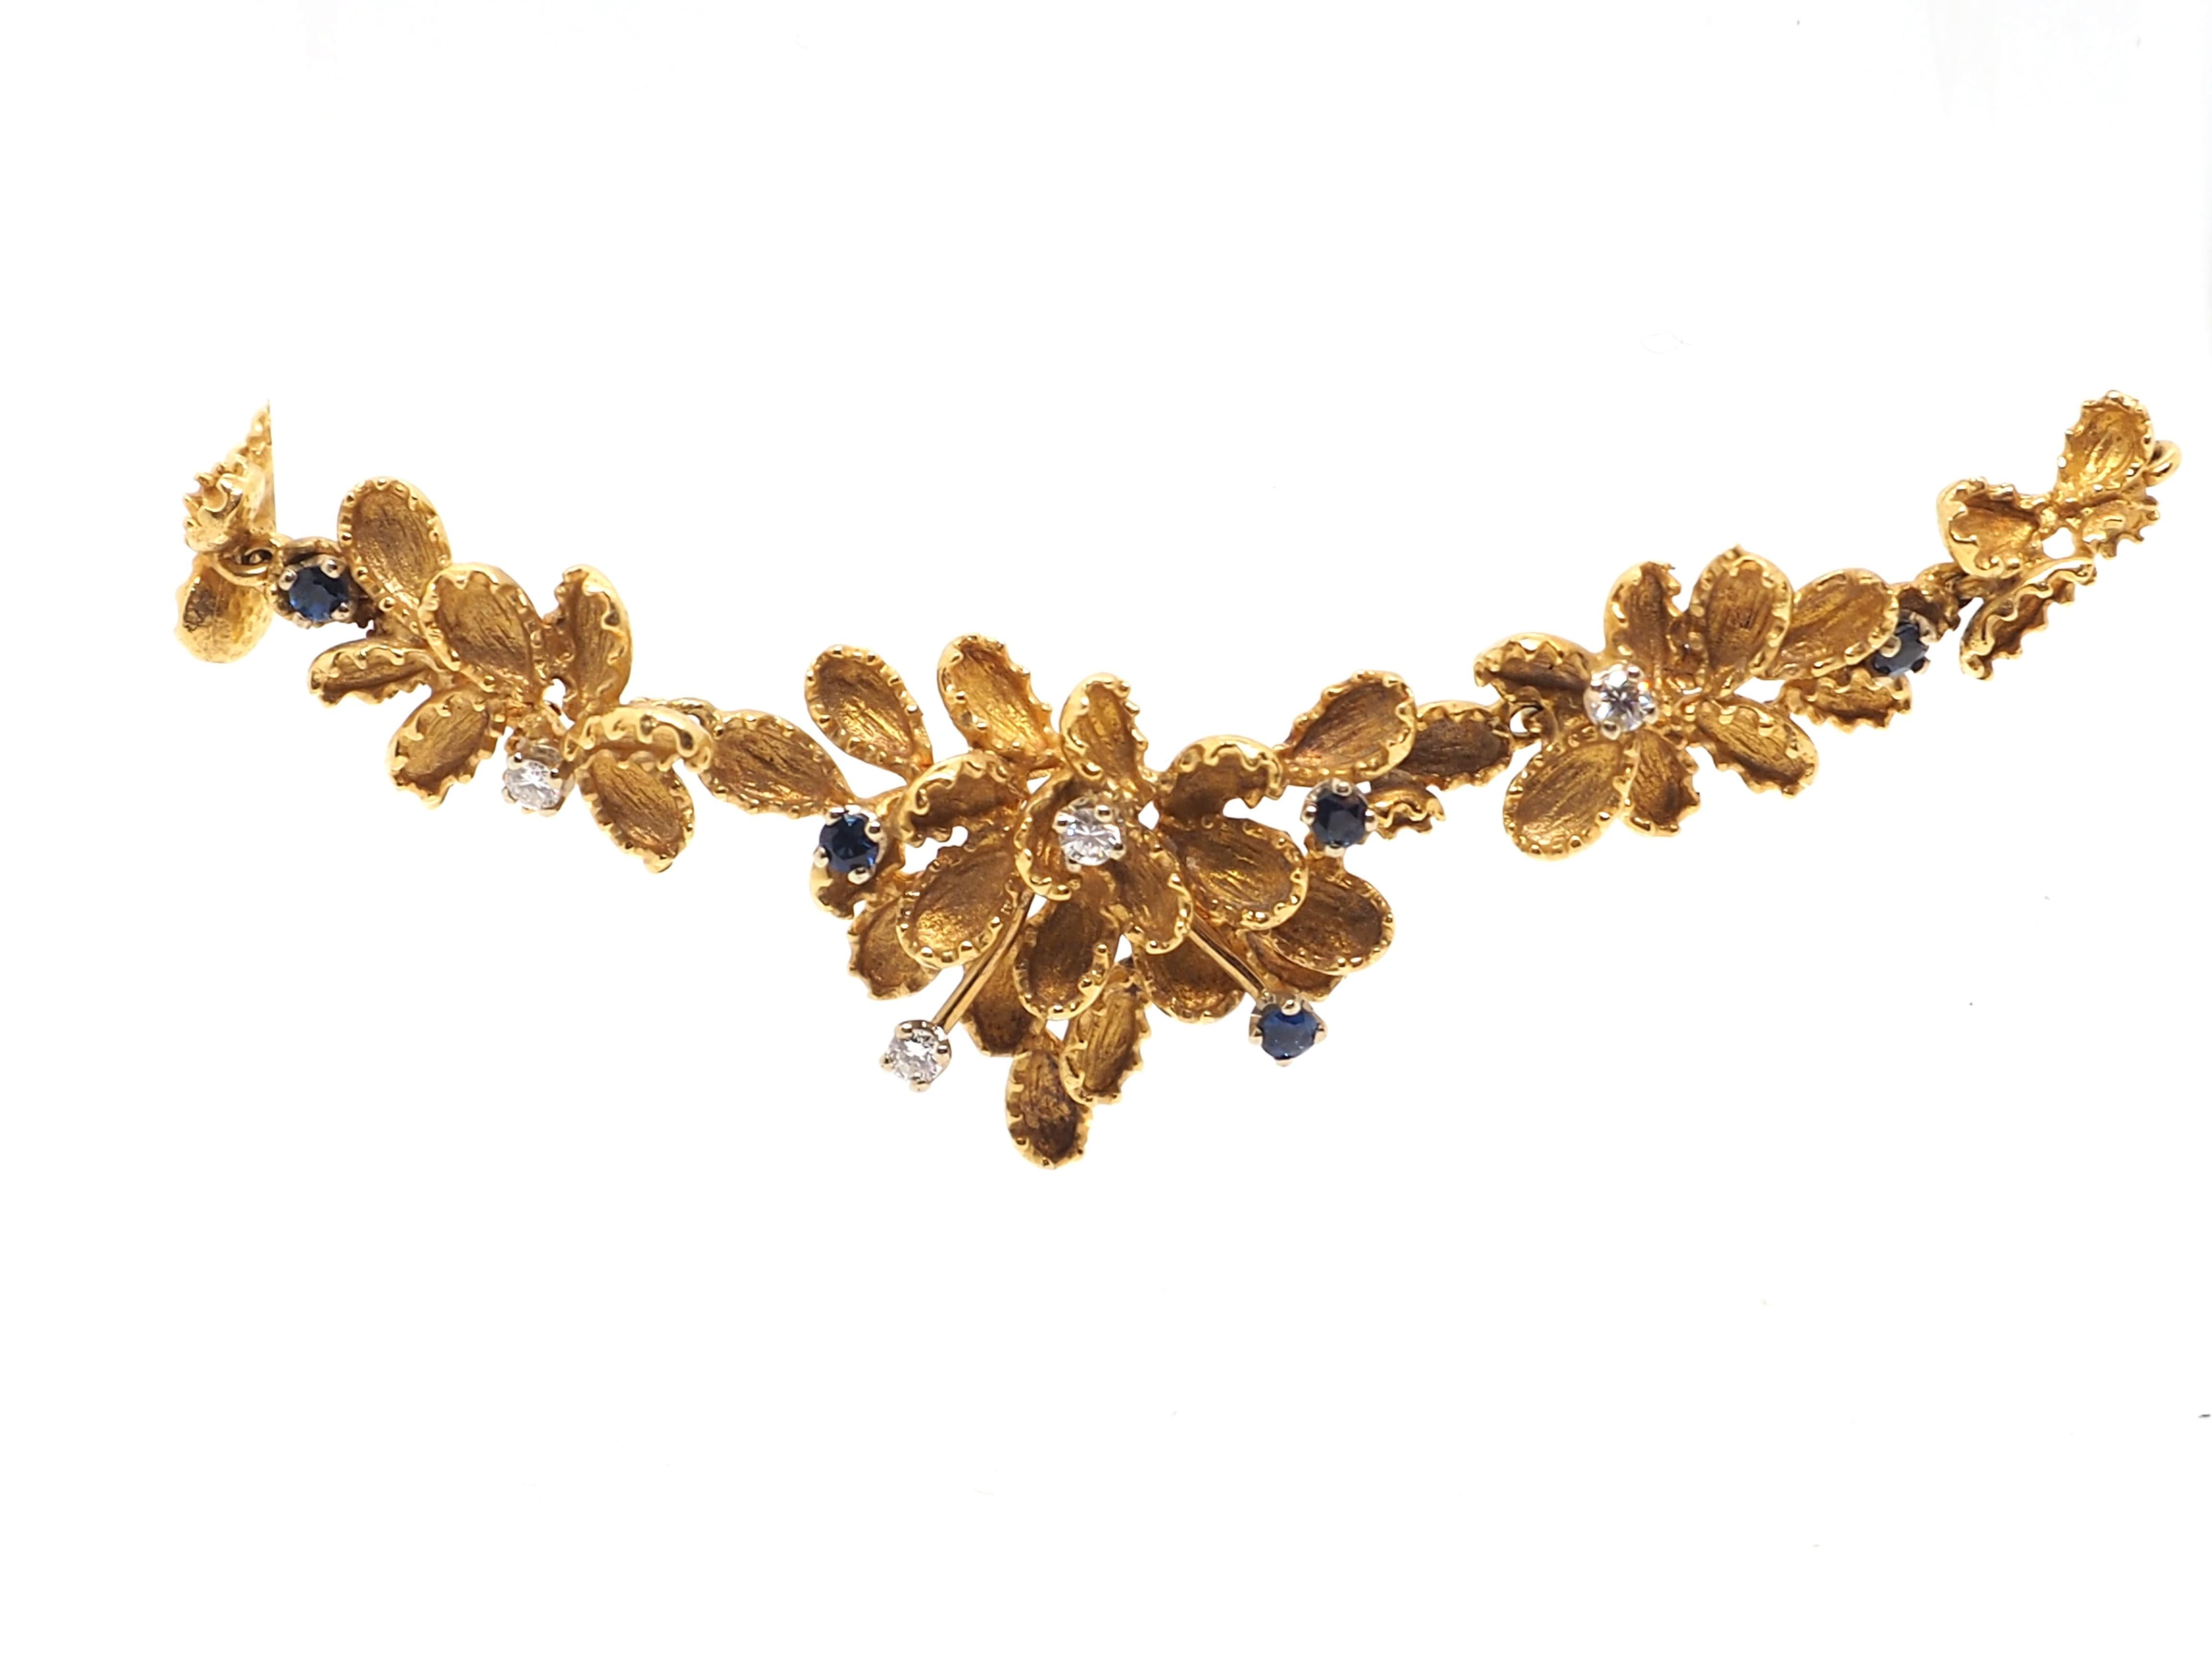 This exquisite ruby and diamond floral necklace is crafted from 18k yellow gold, radiating a warm and luxurious glow. The centerpiece of this stunning piece of jewelry is a series of delicately crafted flowers, each petal meticulously shaped and